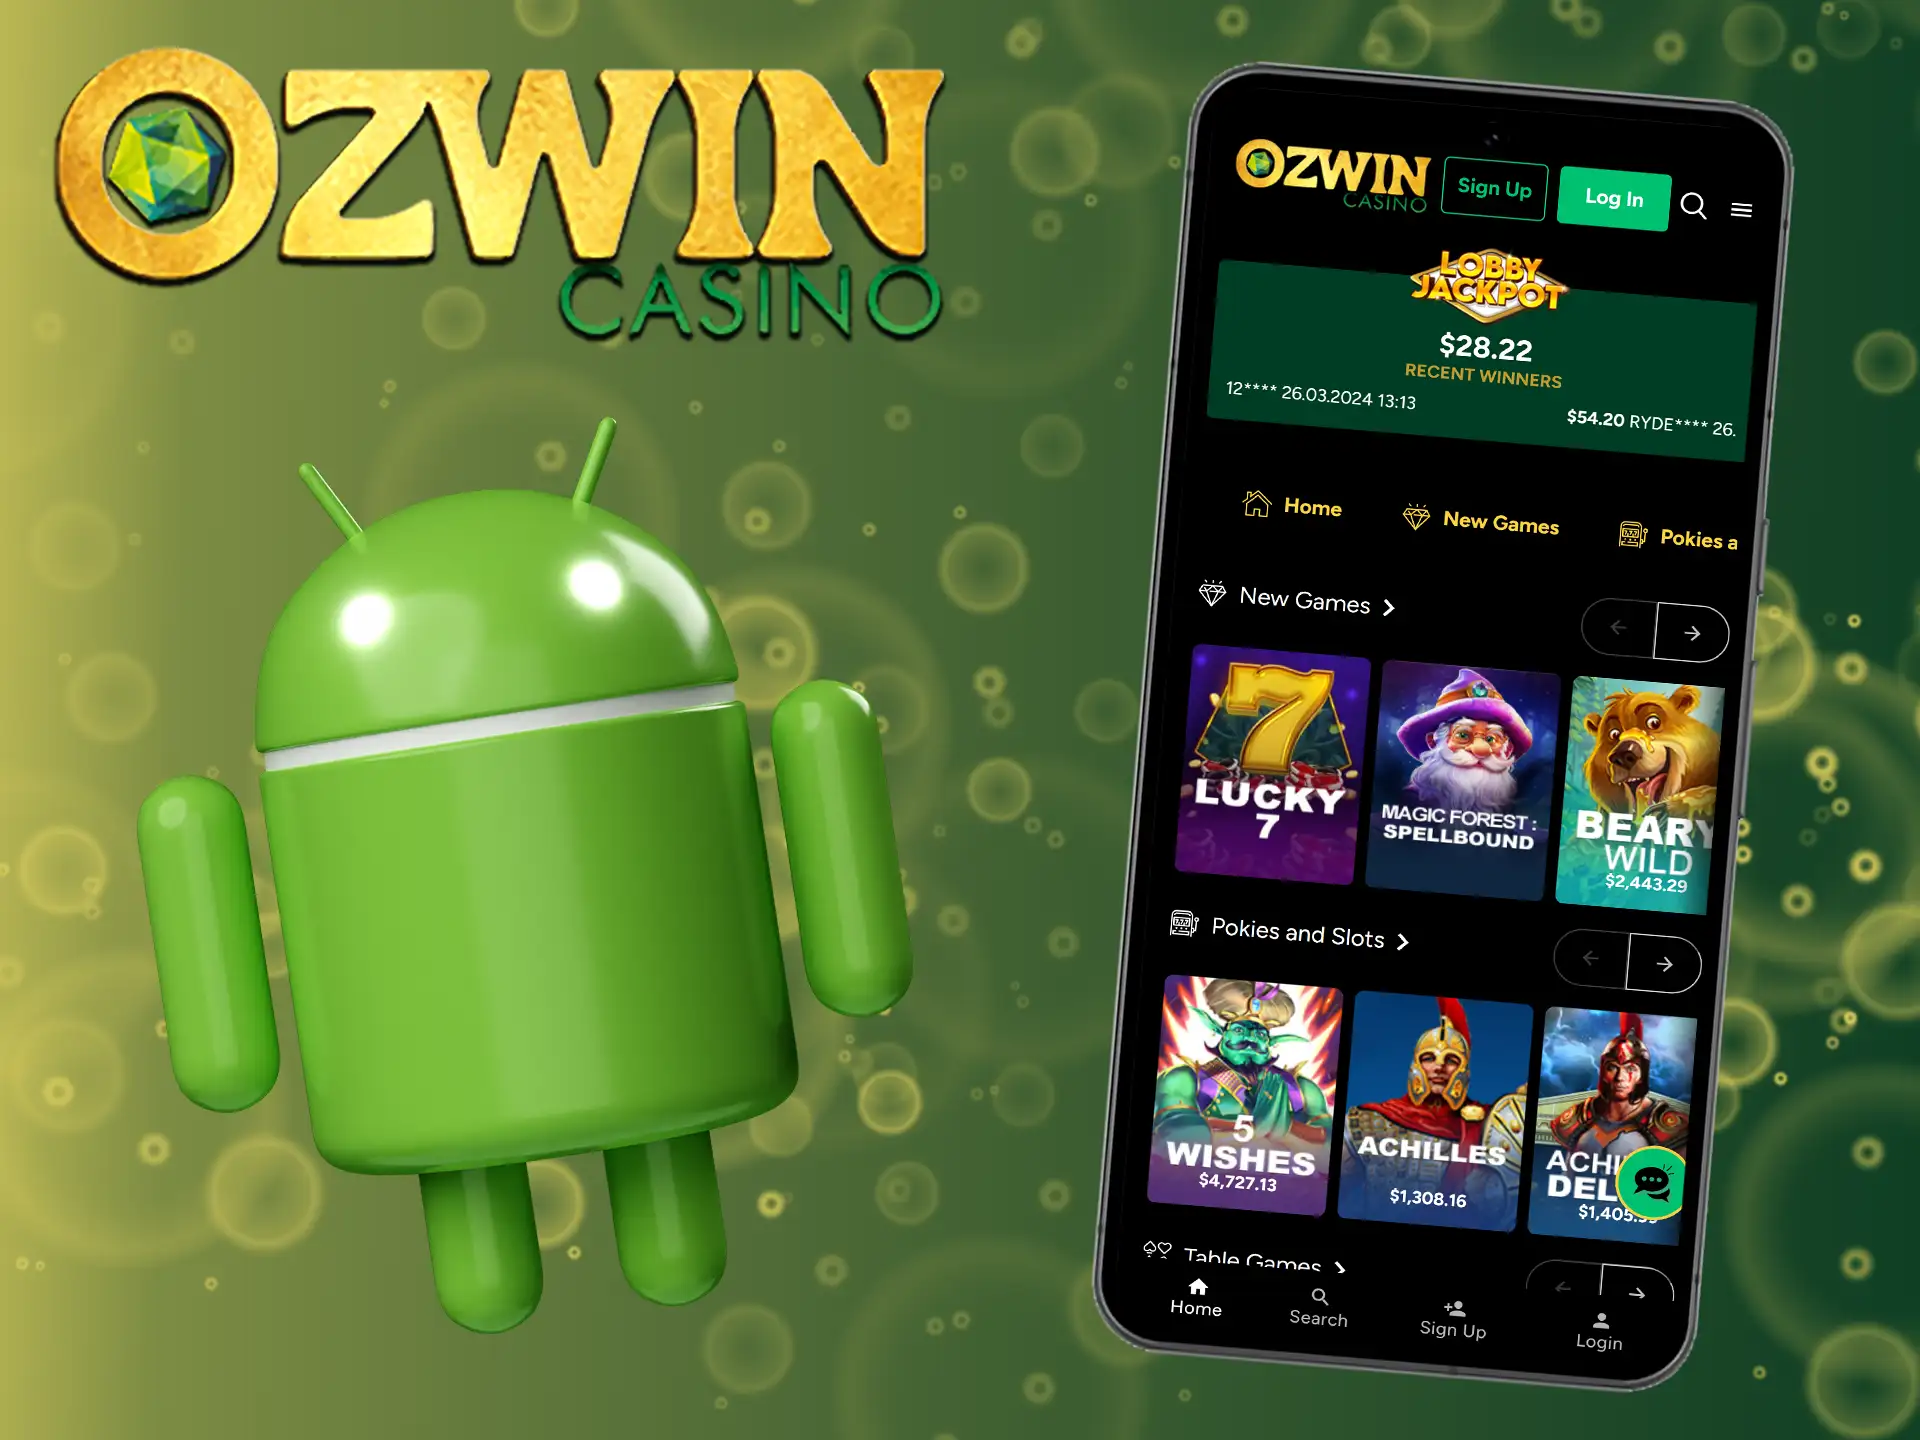 The Ozwin app is coming soon, perfect for our Android users.